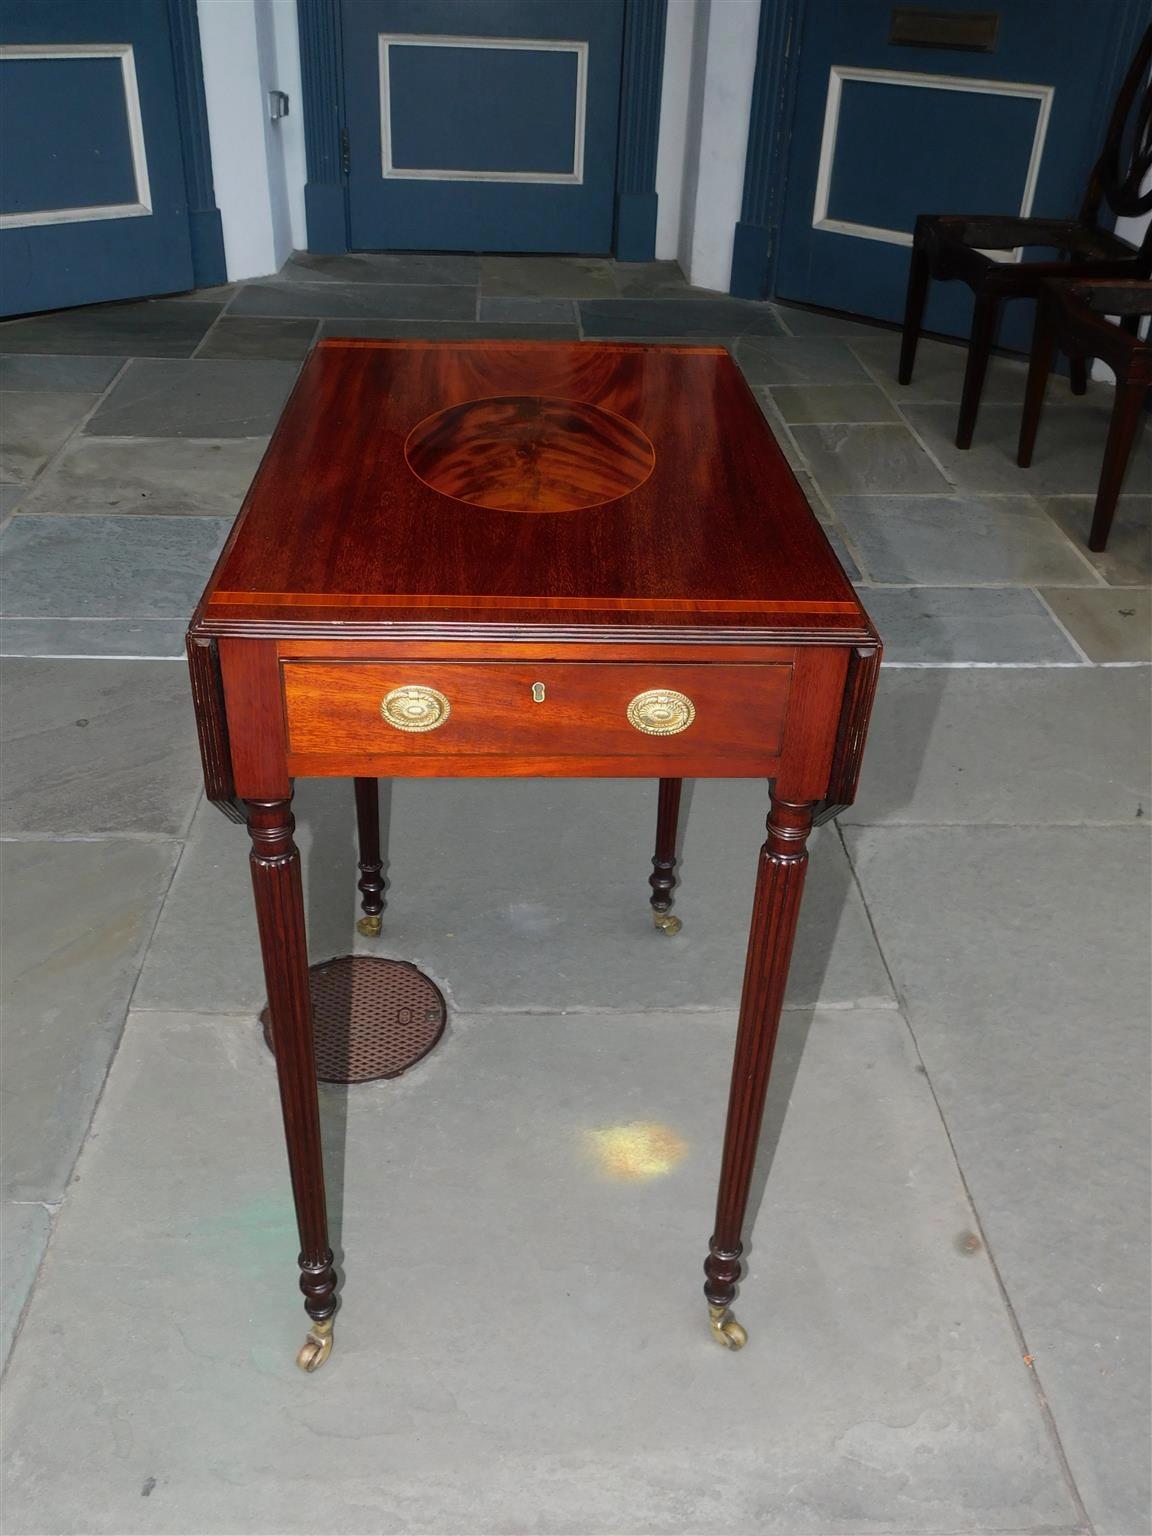 Hand-Carved English Regency Mahogany Tulip Inlaid Pembroke Table with Reeded Legs, C. 1800